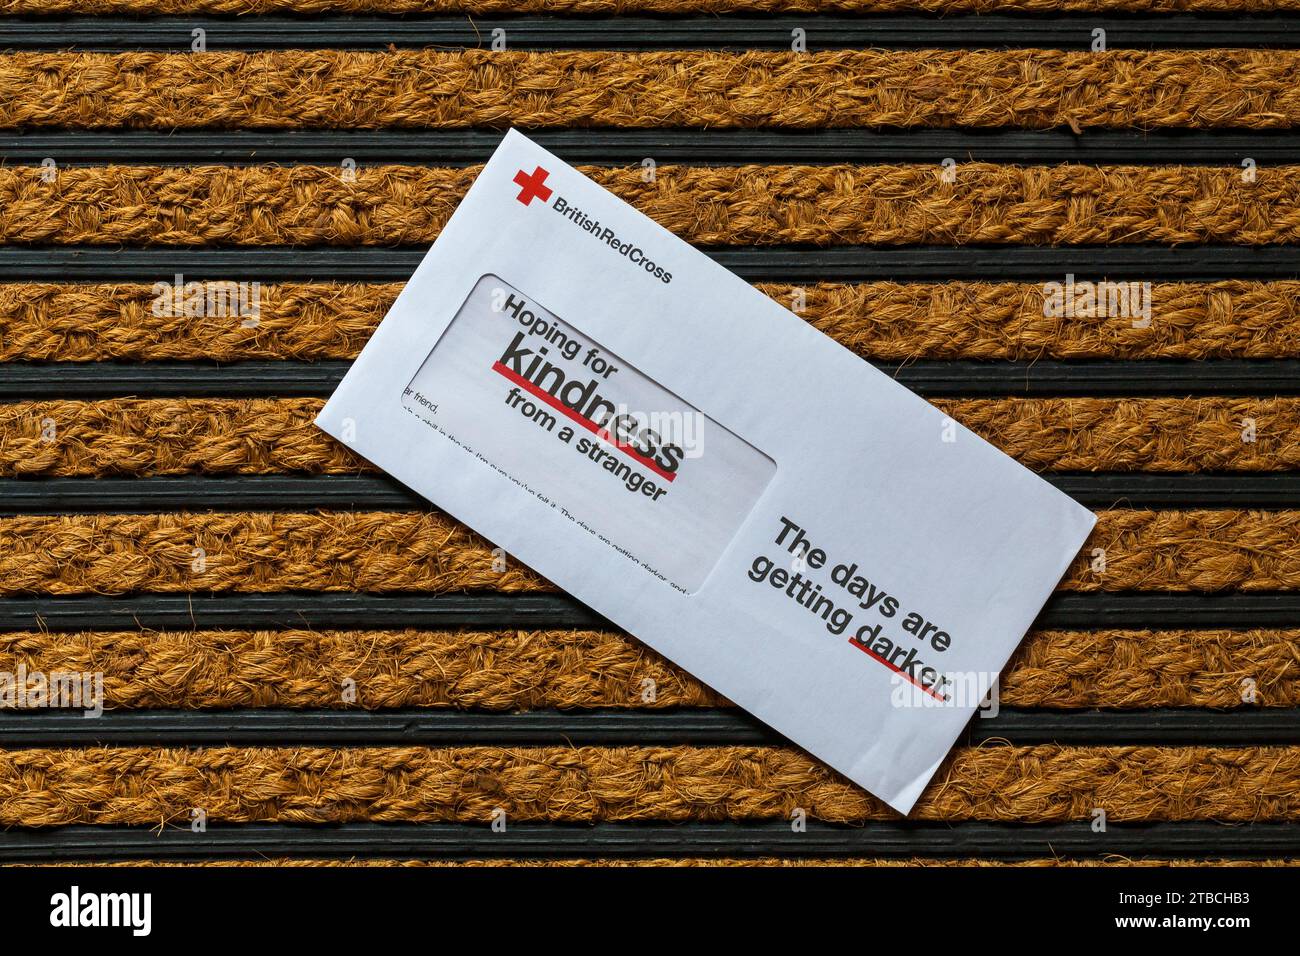 Post on door mat - charity appeal, Christmas appeal from British Red Cross hoping for kindness from a stranger the days are getting darker Stock Photo